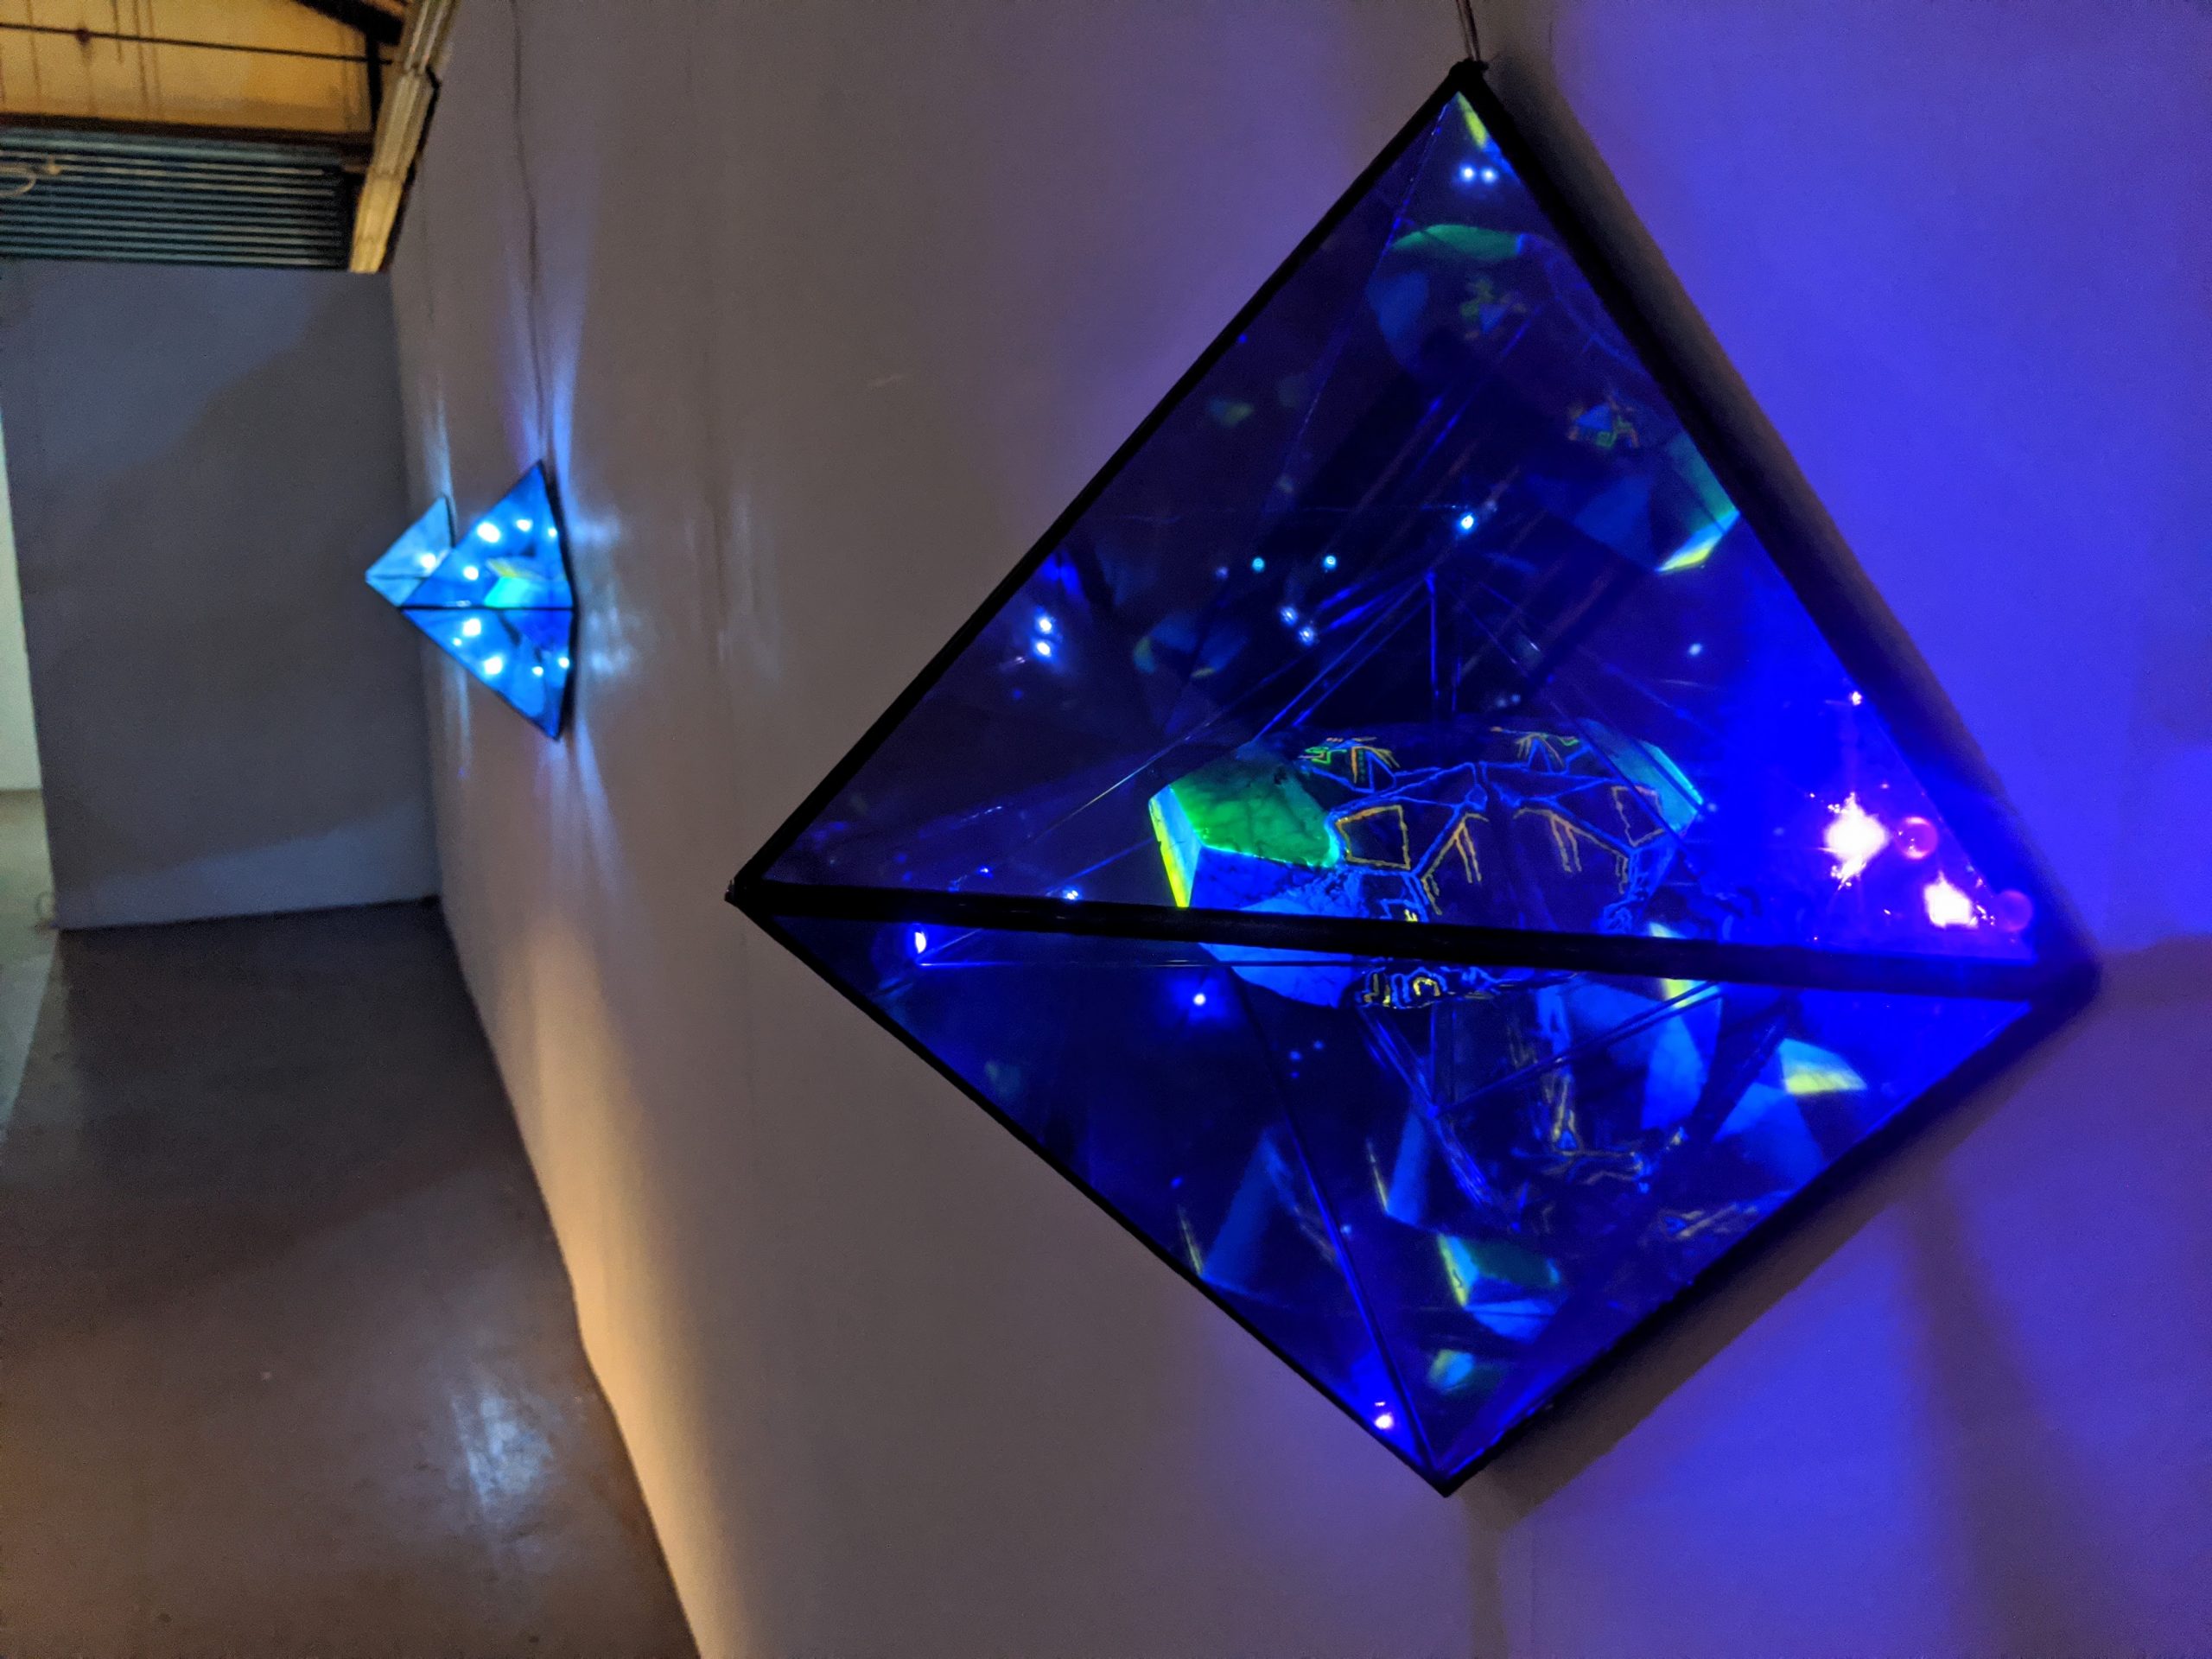 glass pyramid sculpture on wall with blue LED lights